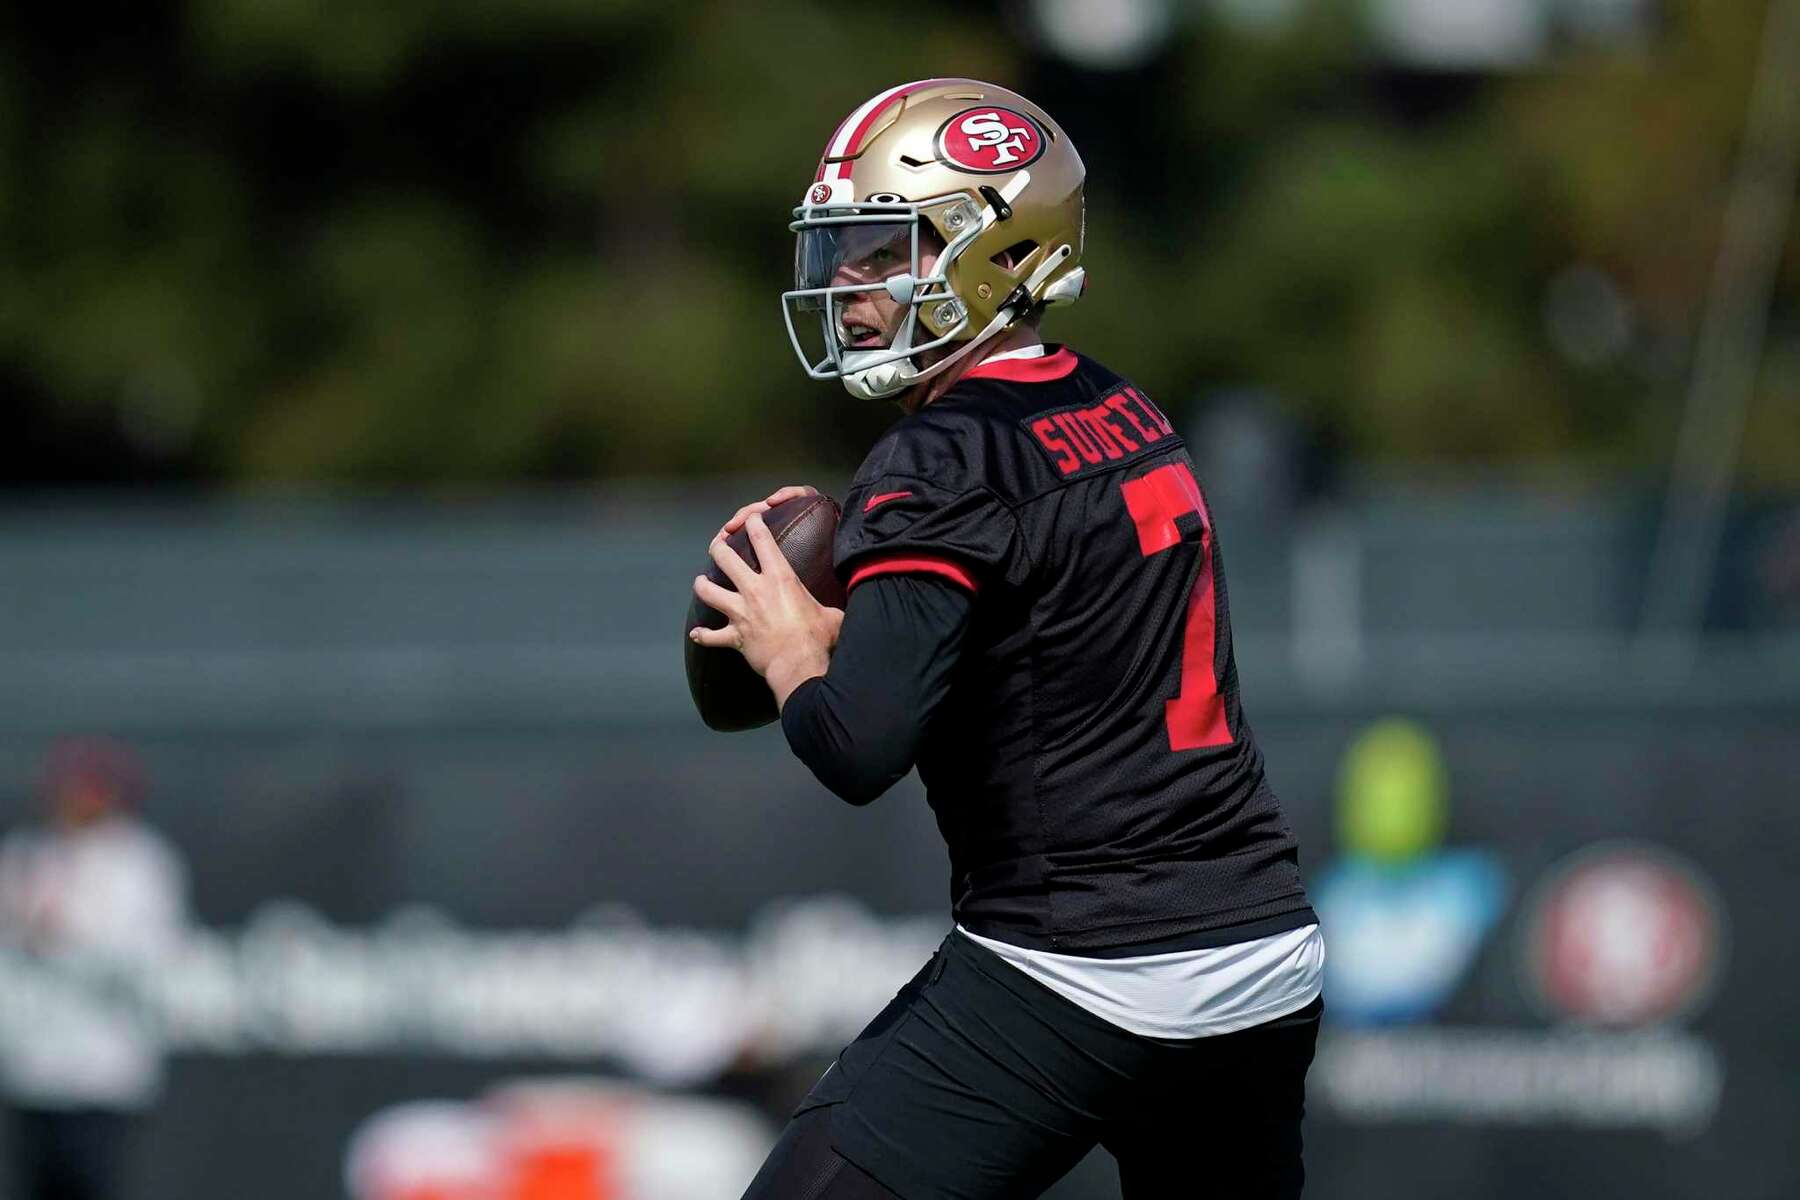 Nate Sudfeld 49ers Most Anonymous Qb Appears Poised To Earn No 3 Spot